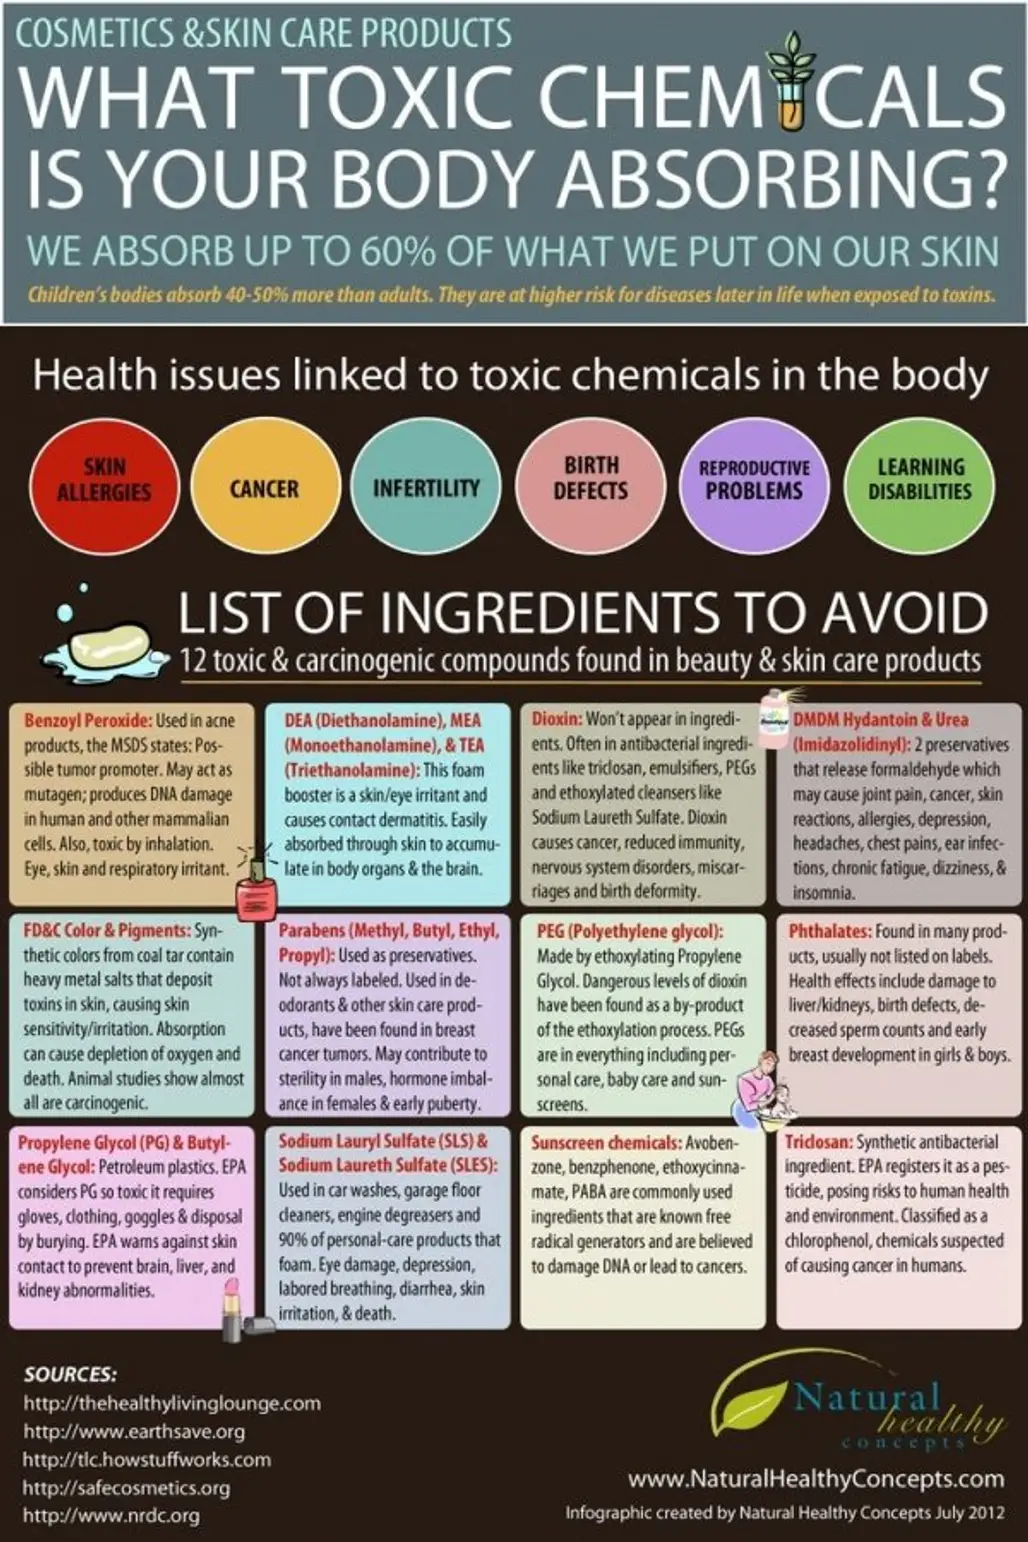 12 Toxic Ingredients to AVOID in Cosmetics & Skin Care Products